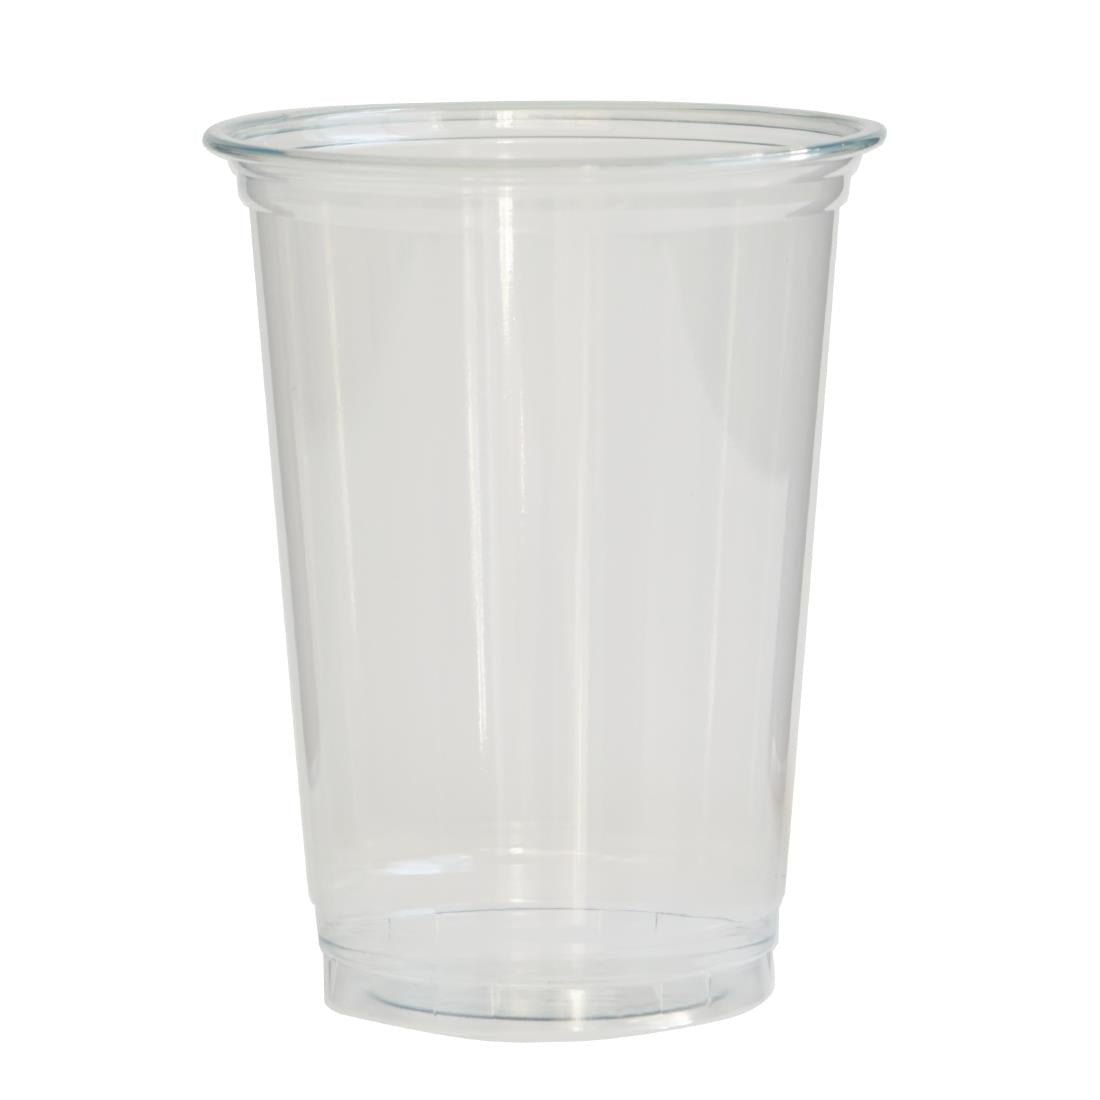 eGreen Disposable Half Pint Glasses to Brim Glasses UKCA CE Marked (Pack of 1250)